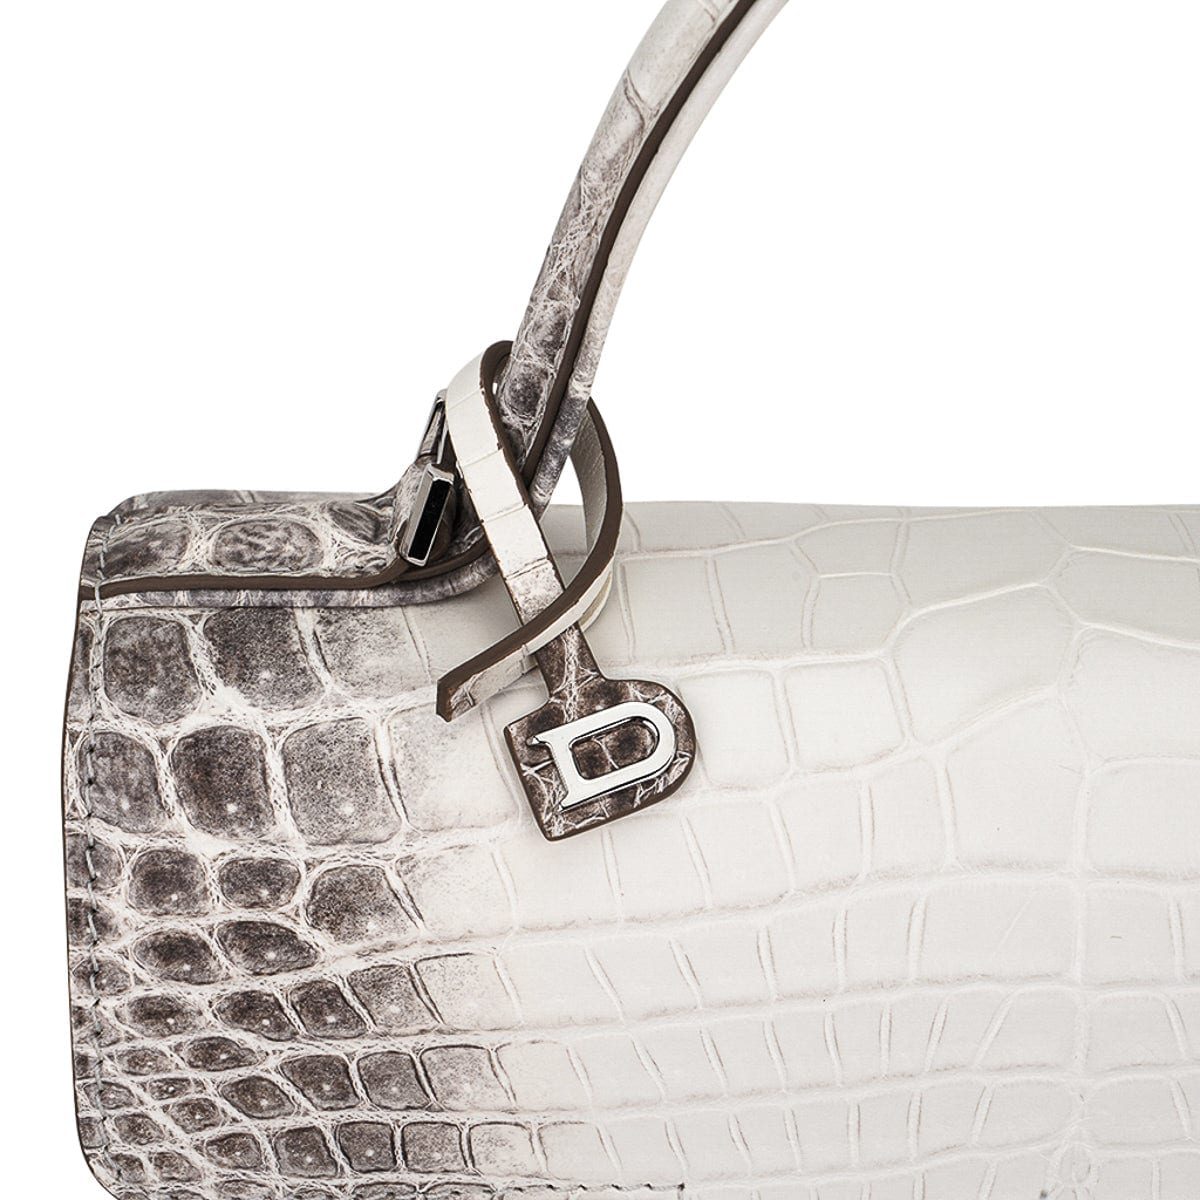 Delvaux Tempete PM Himalaya Crocodile Limited Edition • MIGHTYCHIC • 